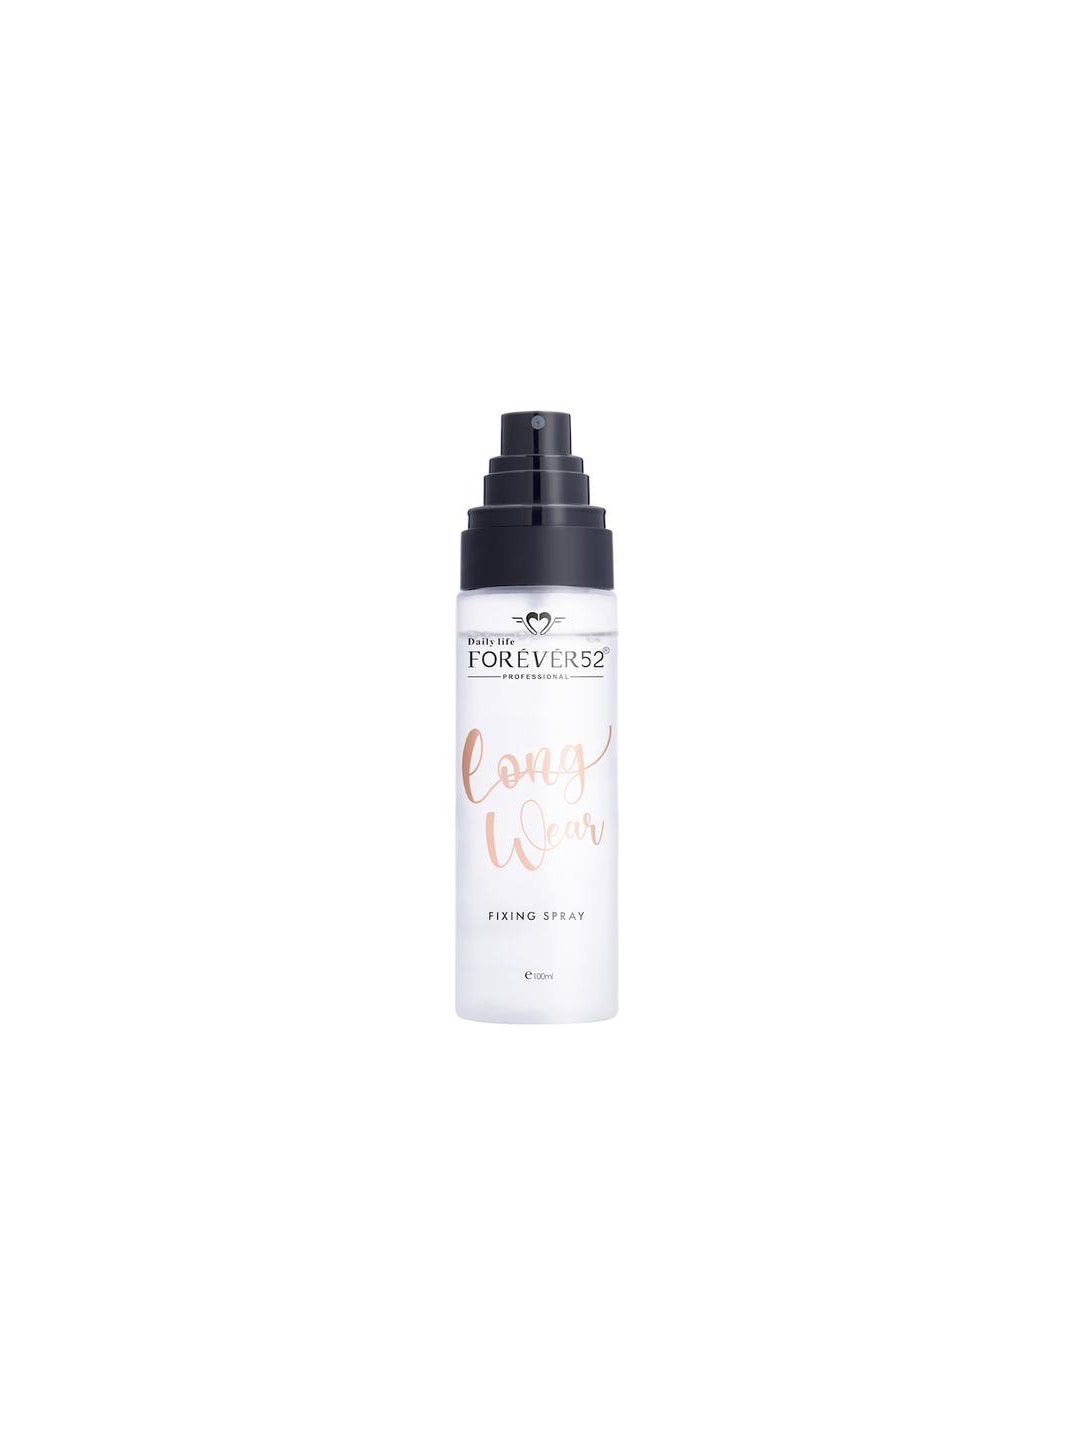 Daily Life Forever52 Professional Long Wear Makeup Fixing Spray 100 ml Price in India